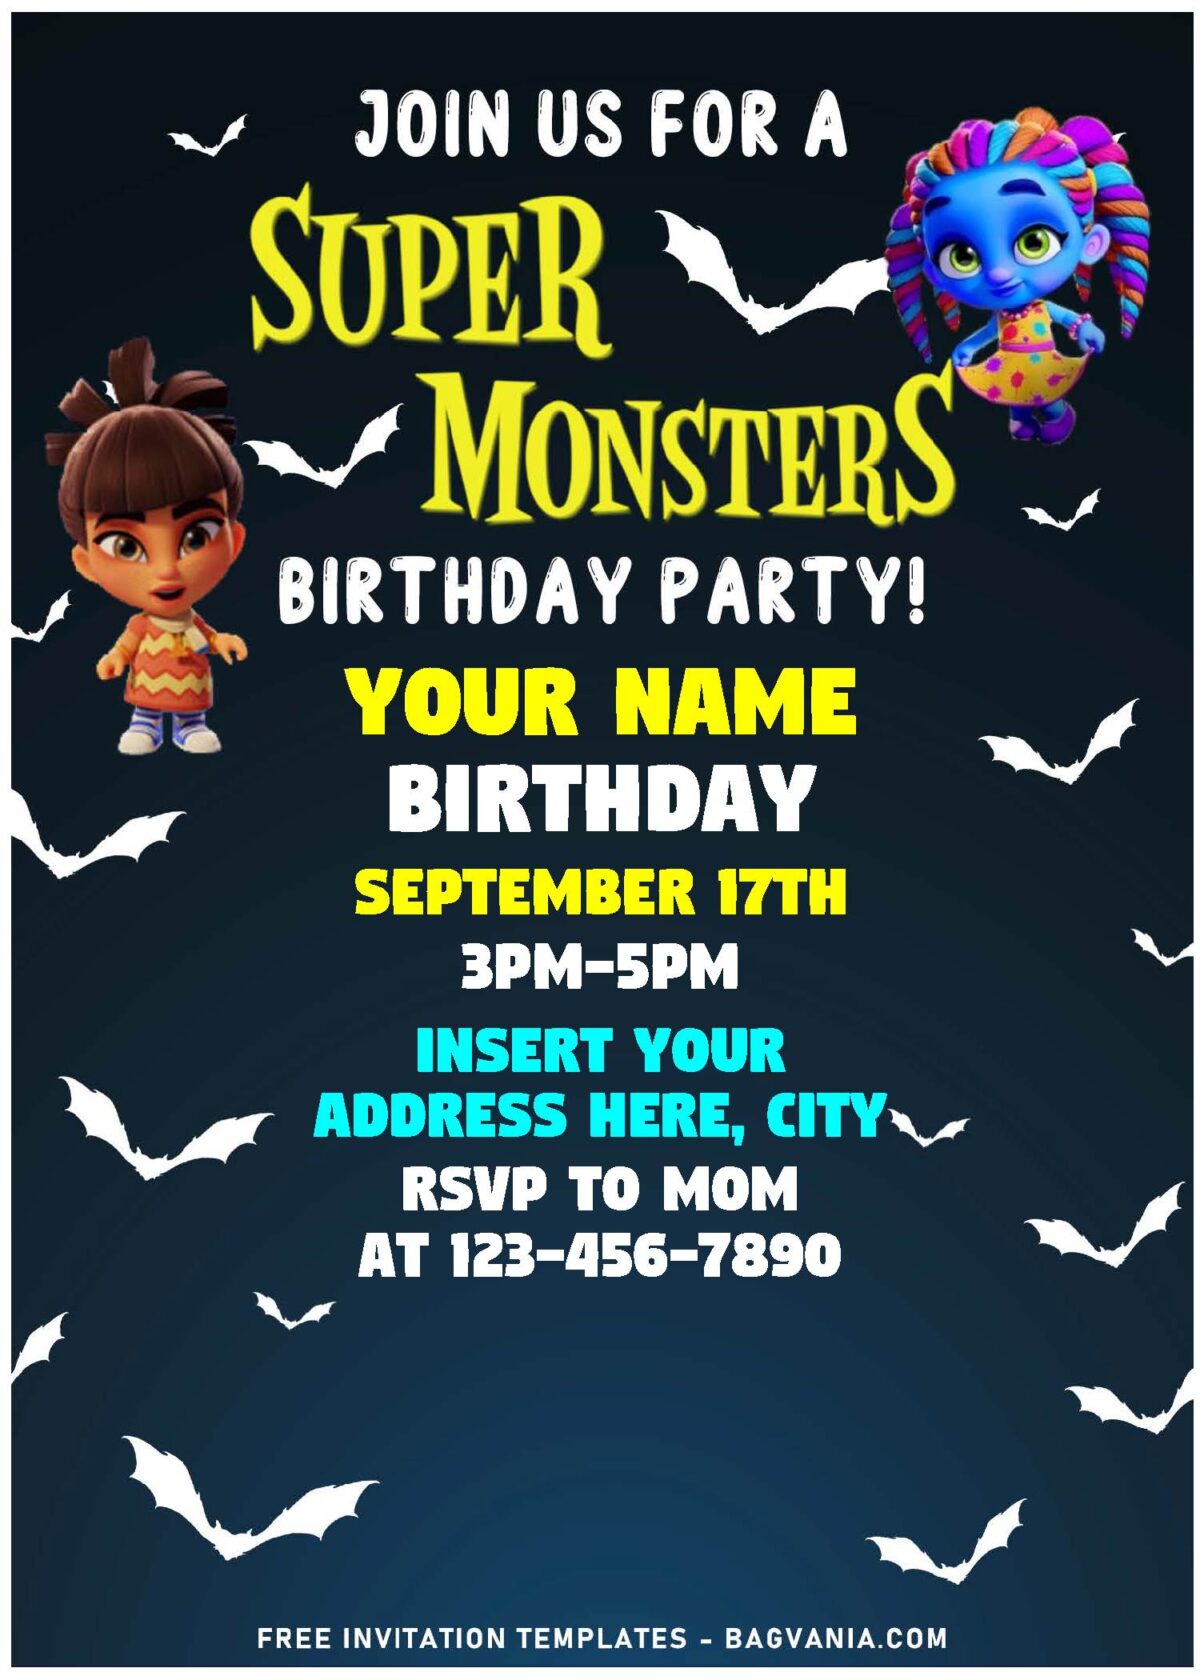 (Free Editable PDF) Spooktacular Super Monster Birthday Invitation Templates with chalkboard background